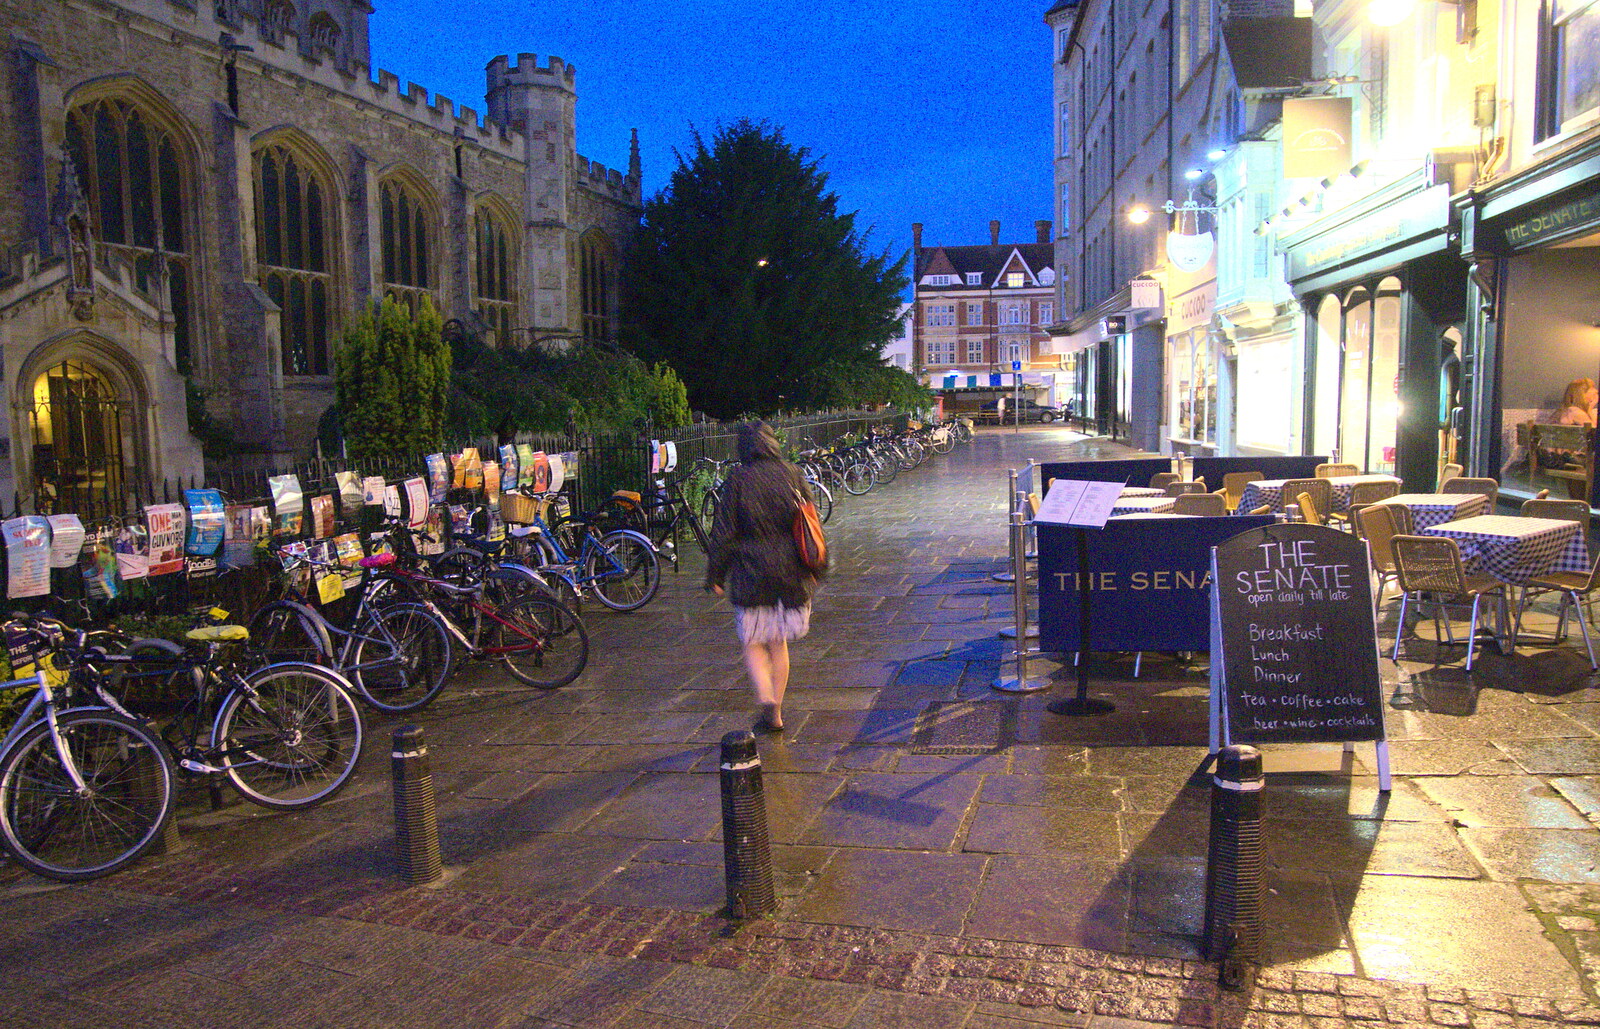 Back in the 'Bridge: an Anniversary, Cambridge - 3rd July 2016: Isobel on St. Mary's Passage